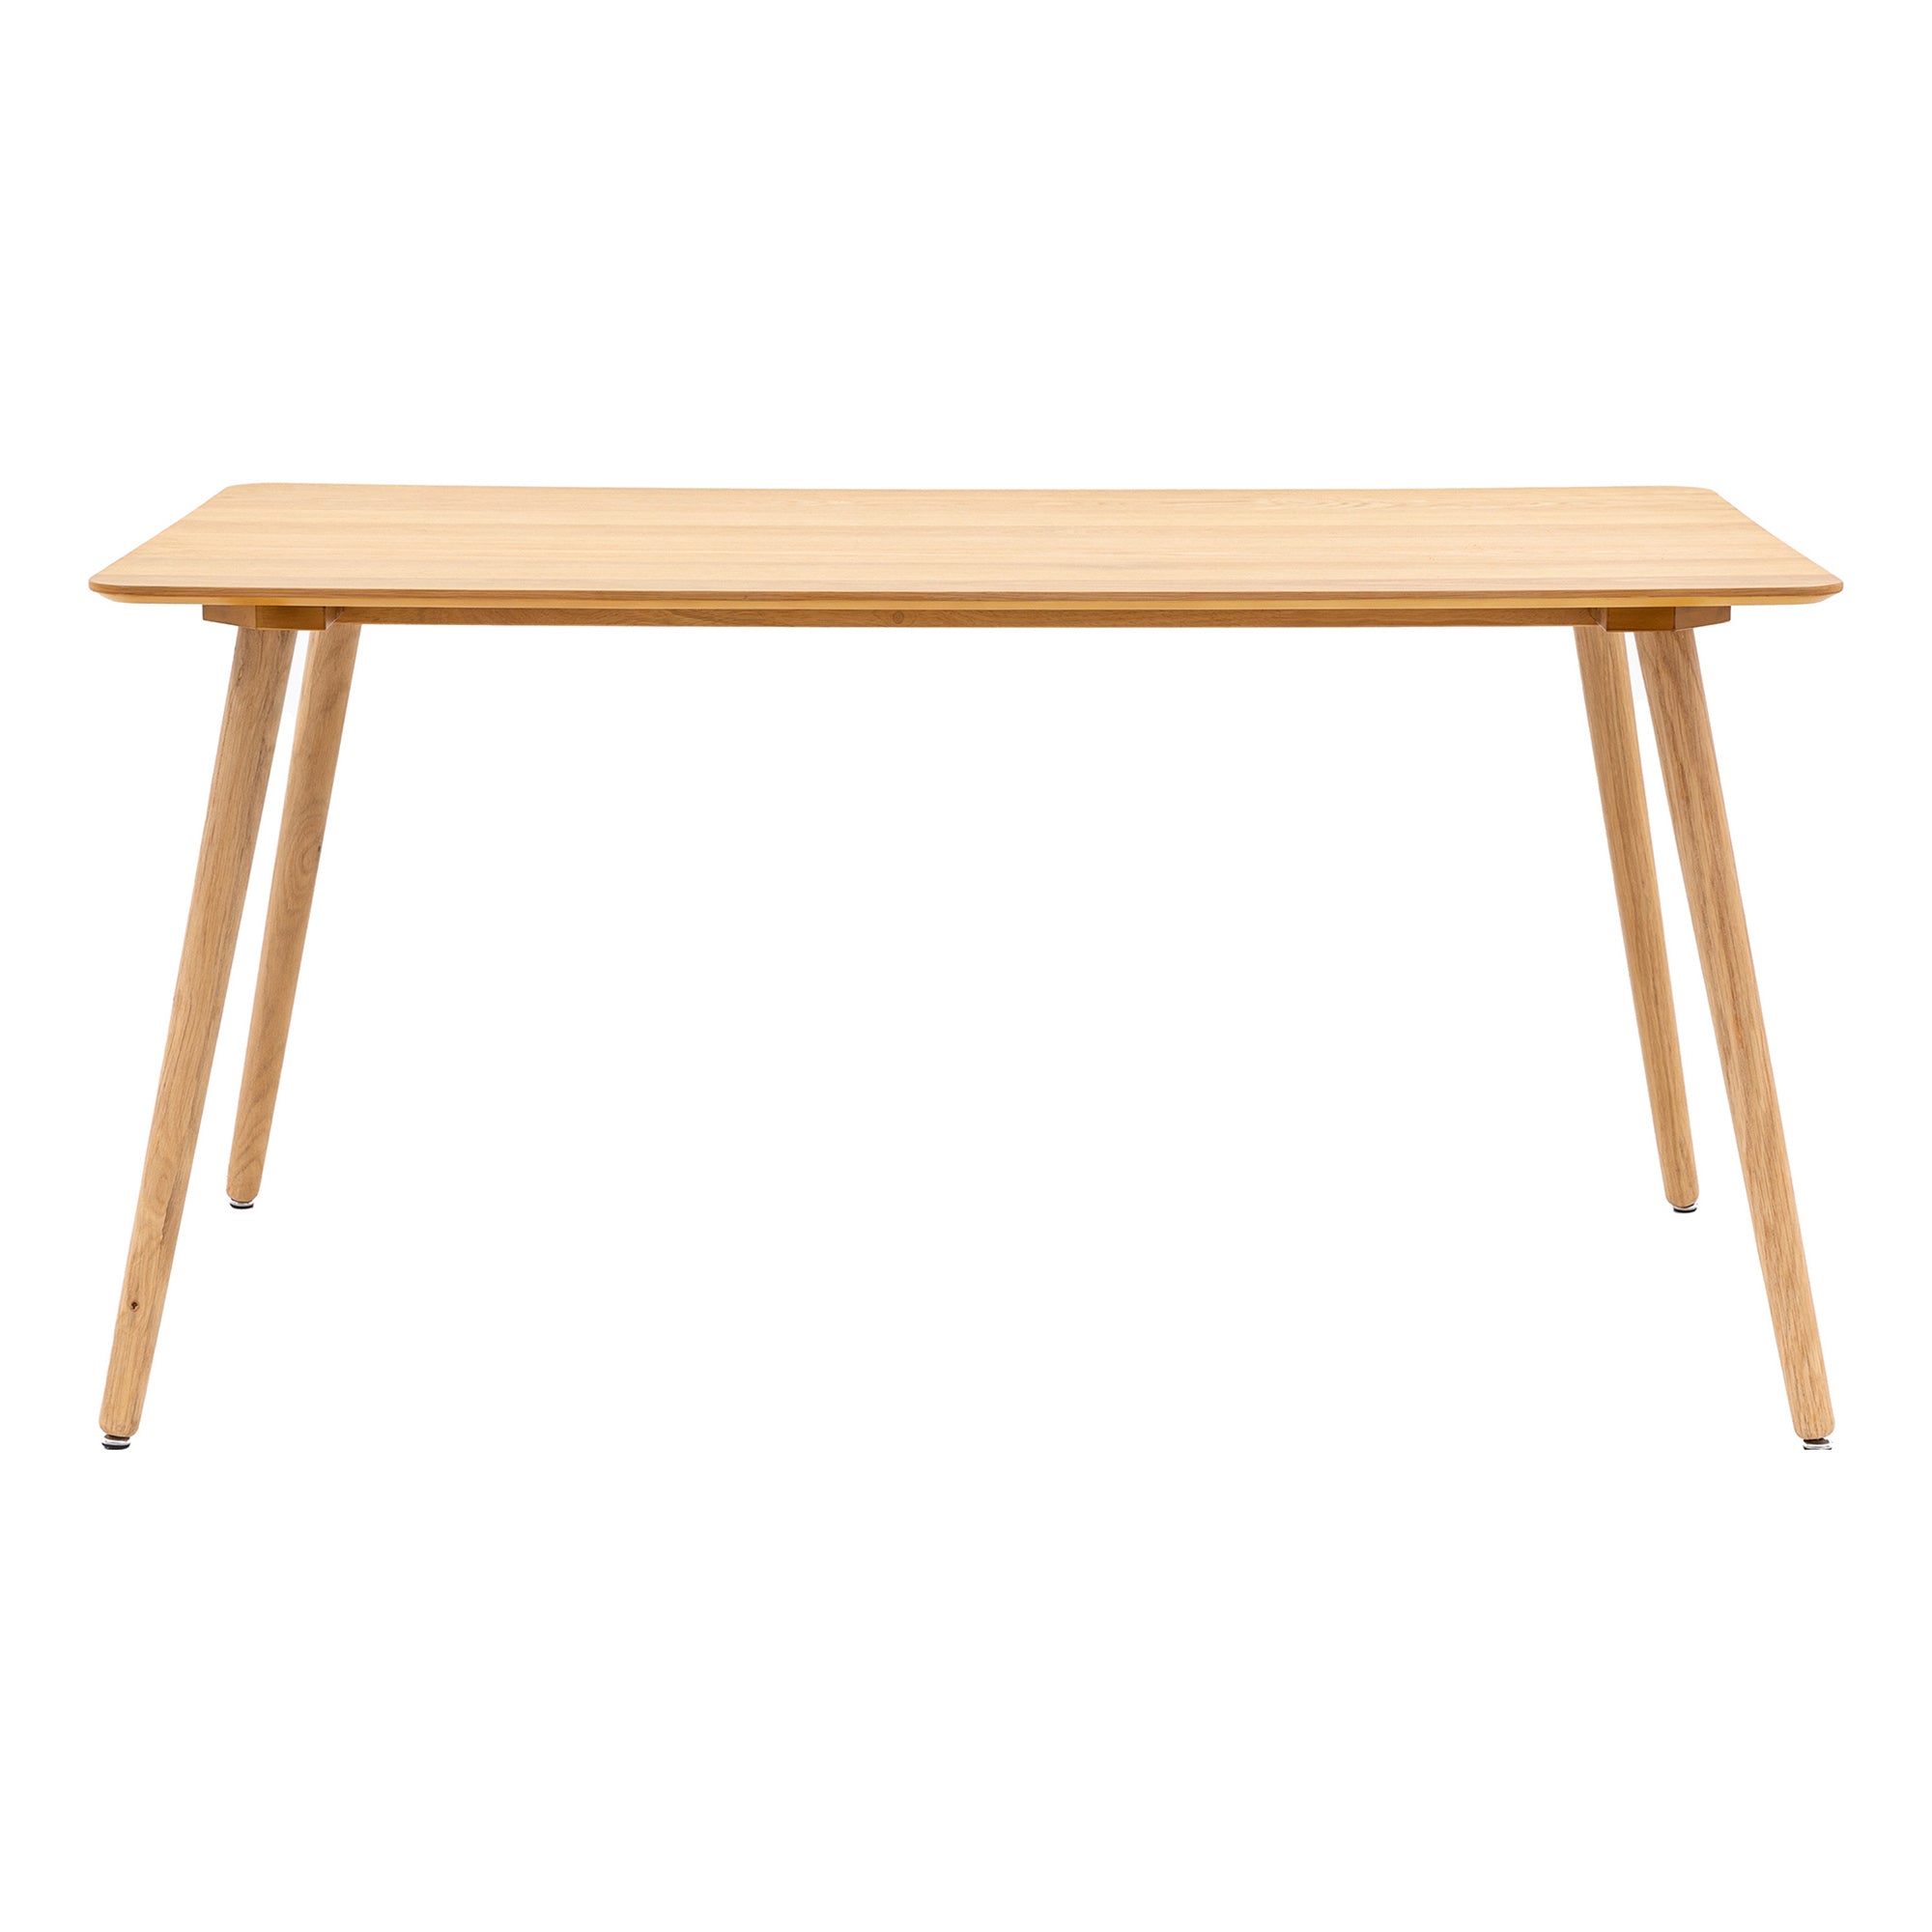 Hattie Rectangle Dining Table